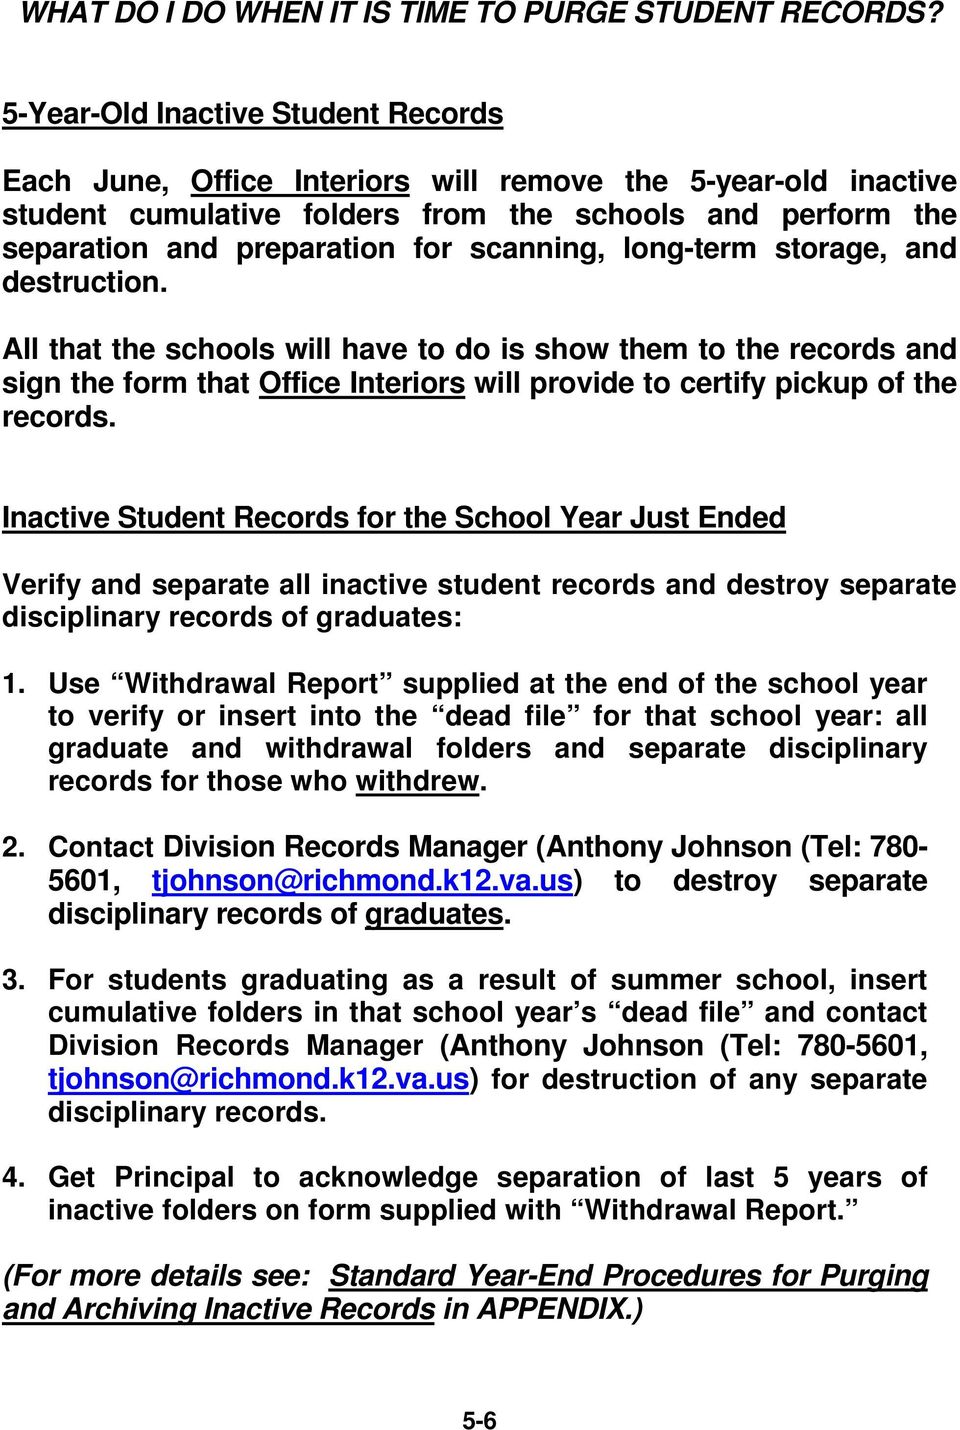 scanning, long-term storage, and destruction. All that the schools will have to do is show them to the records and sign the form that Office Interiors will provide to certify pickup of the records.